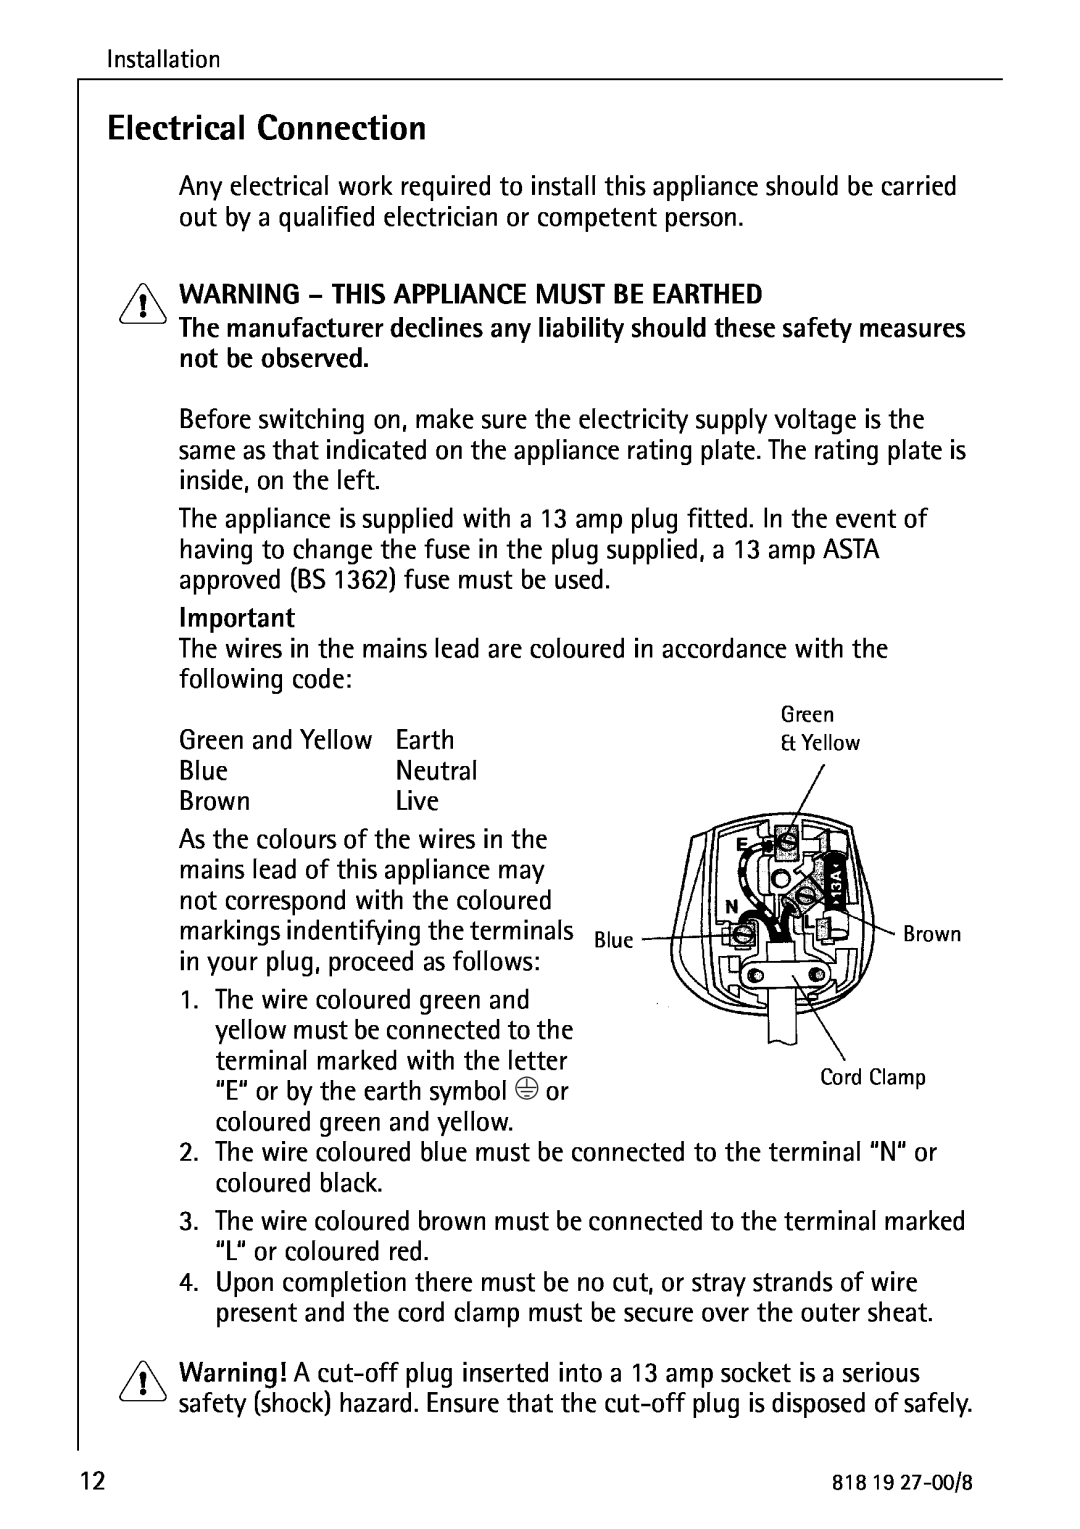 Electrolux Upright Refrigerator manual Electrical Connection, Warning - This Appliance Must Be Earthed 